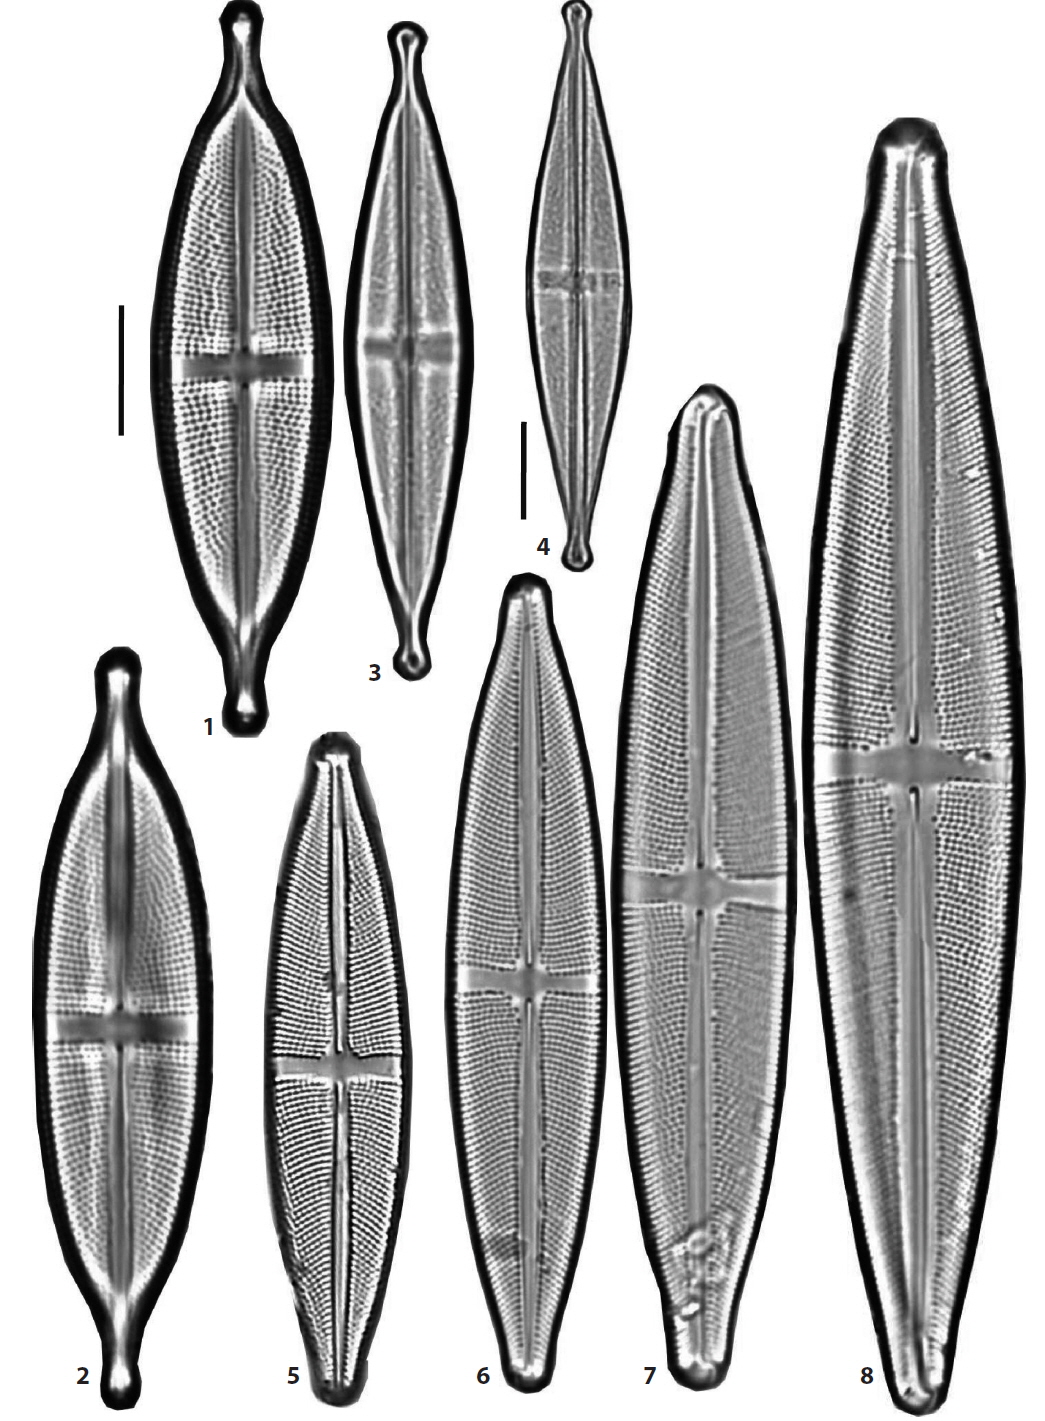 Figs. 1, 2. Stauroneis ancepsopsis, Figs. 3, 4. S. gracilior, Figs. 5, 6. S. subgracilis, Figs. 7, 8. S. gracilis. Scale bars, 10 μm (×1500 magnification in Fig. 4 and ×2000 in others).